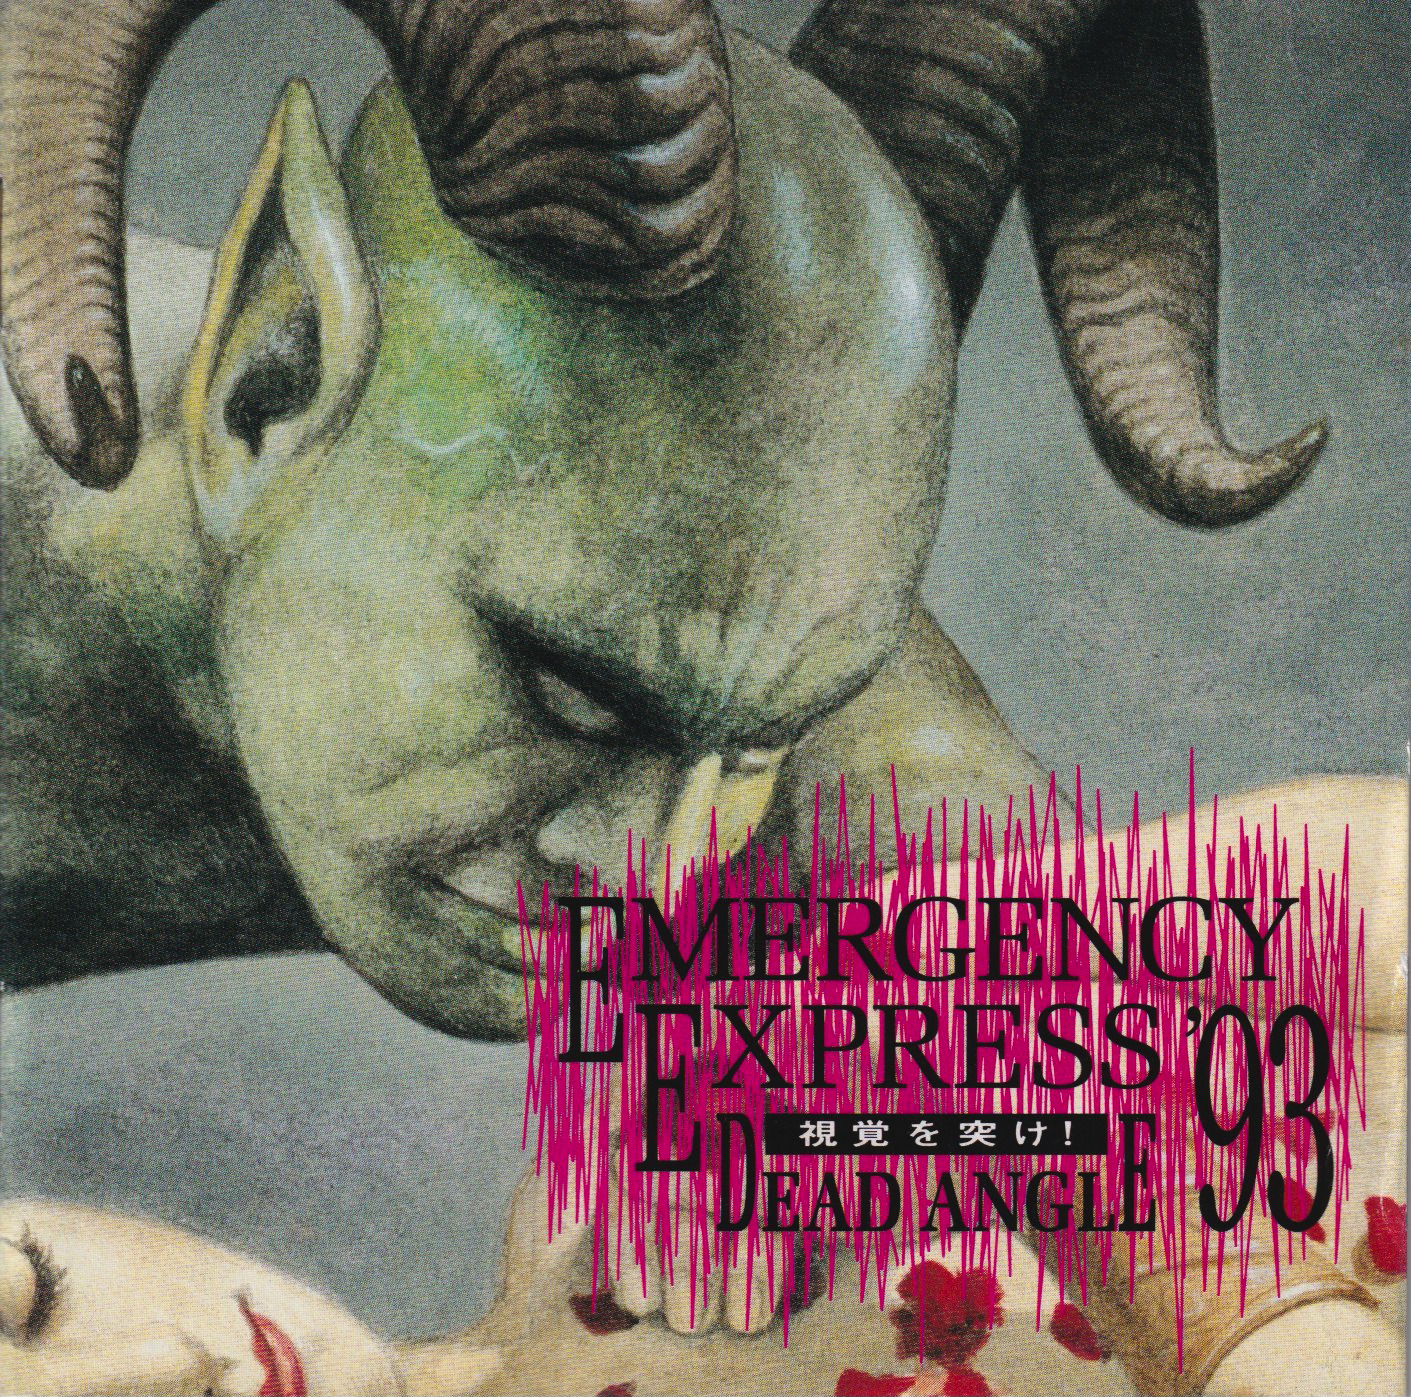 EMERGENCY EXPRESS '93 ~ DEAD ANGLE 視覚を突け！ / V.A.